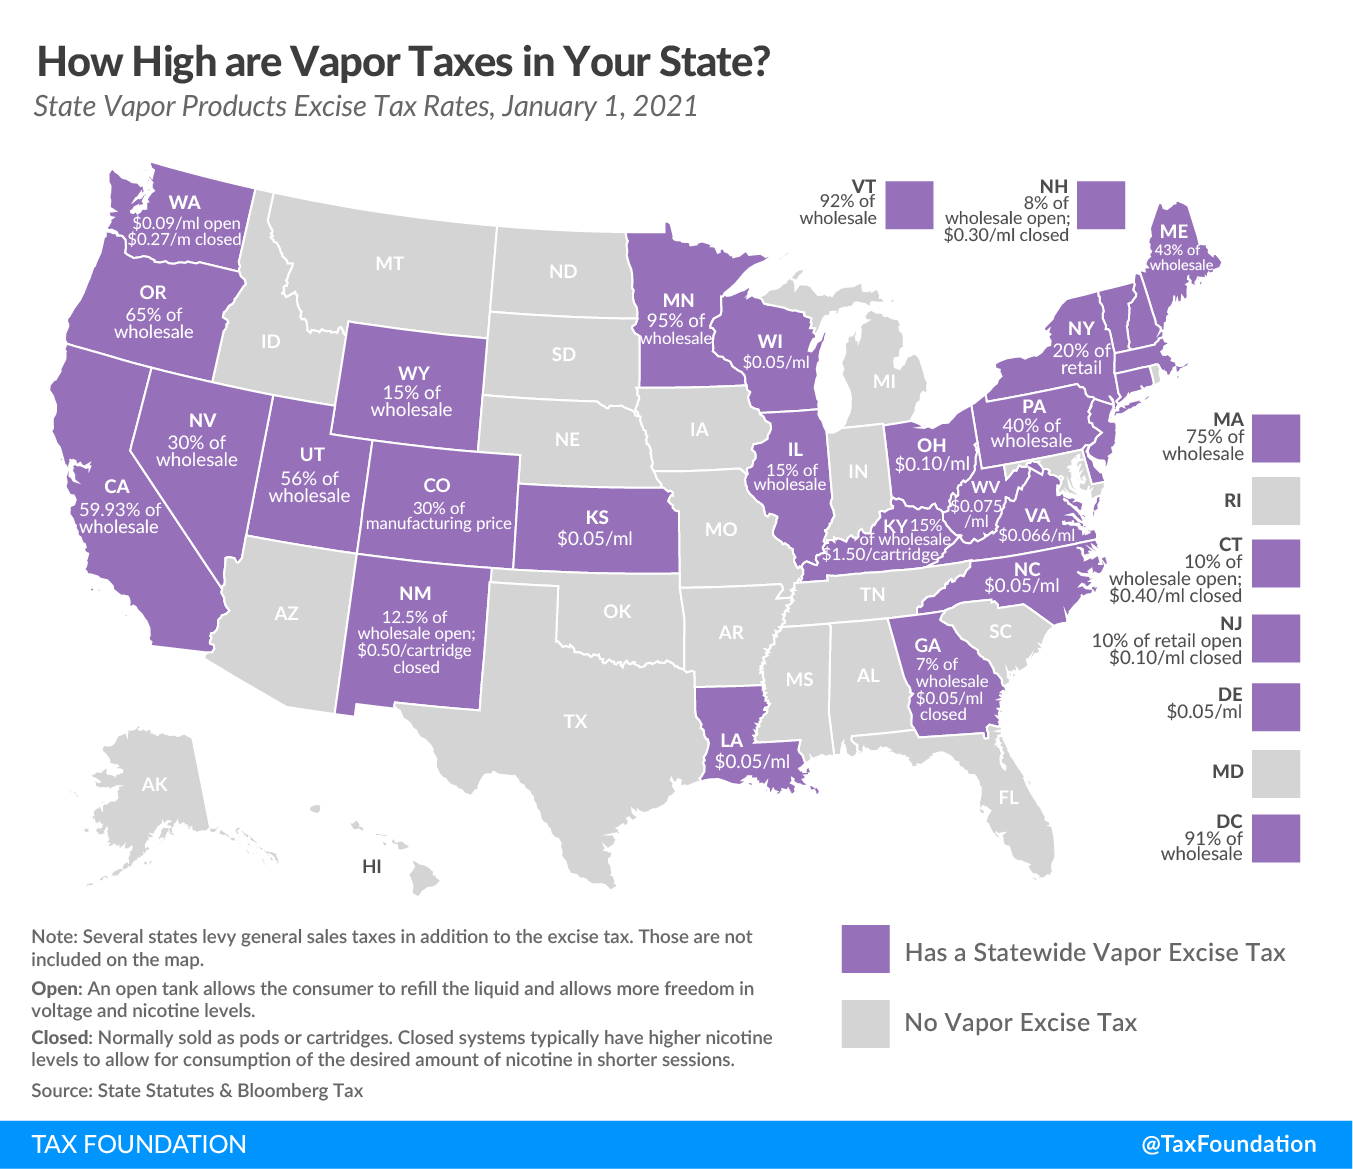 State-vaping-taxes-2021-state-vaping-tax-rates-and-vaping-taxes-by-state.-2021-state-vapor-tax-rates-Vape-and-e-cigarette-taxes.png